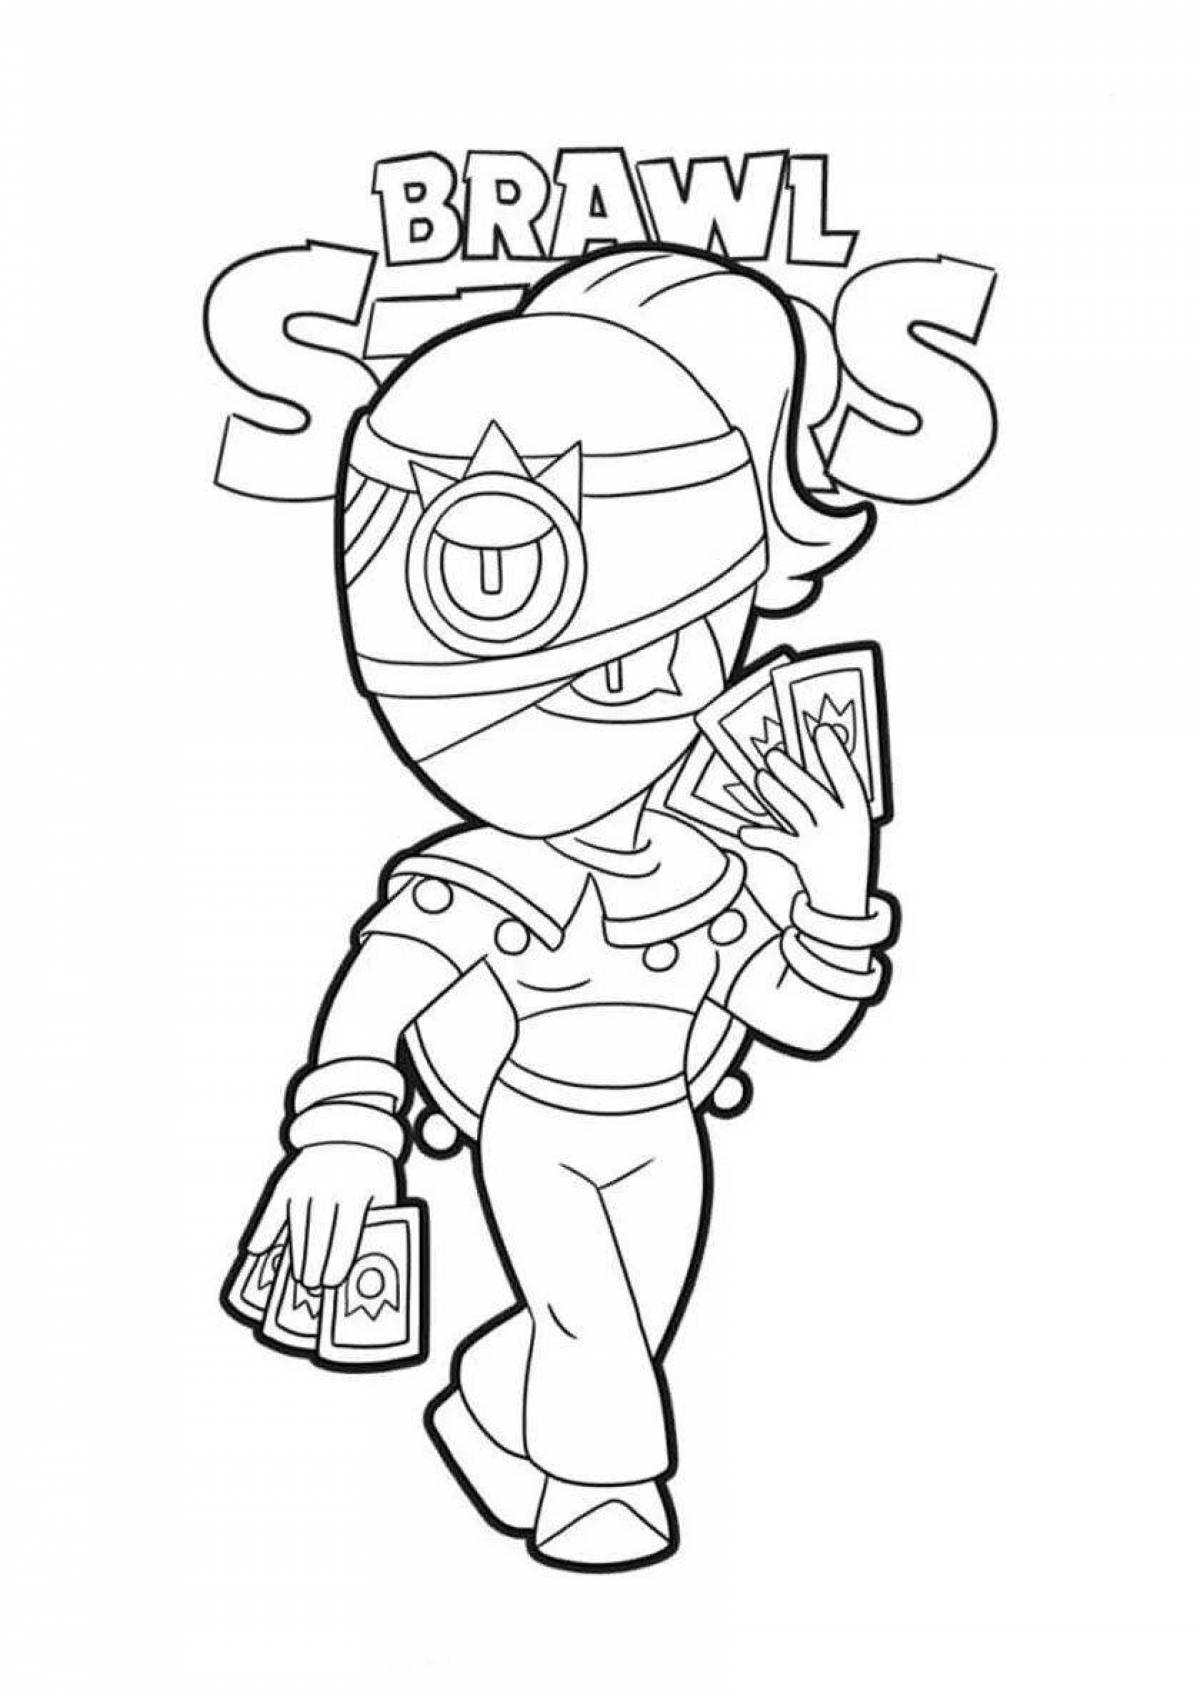 Lovely bad container coloring page